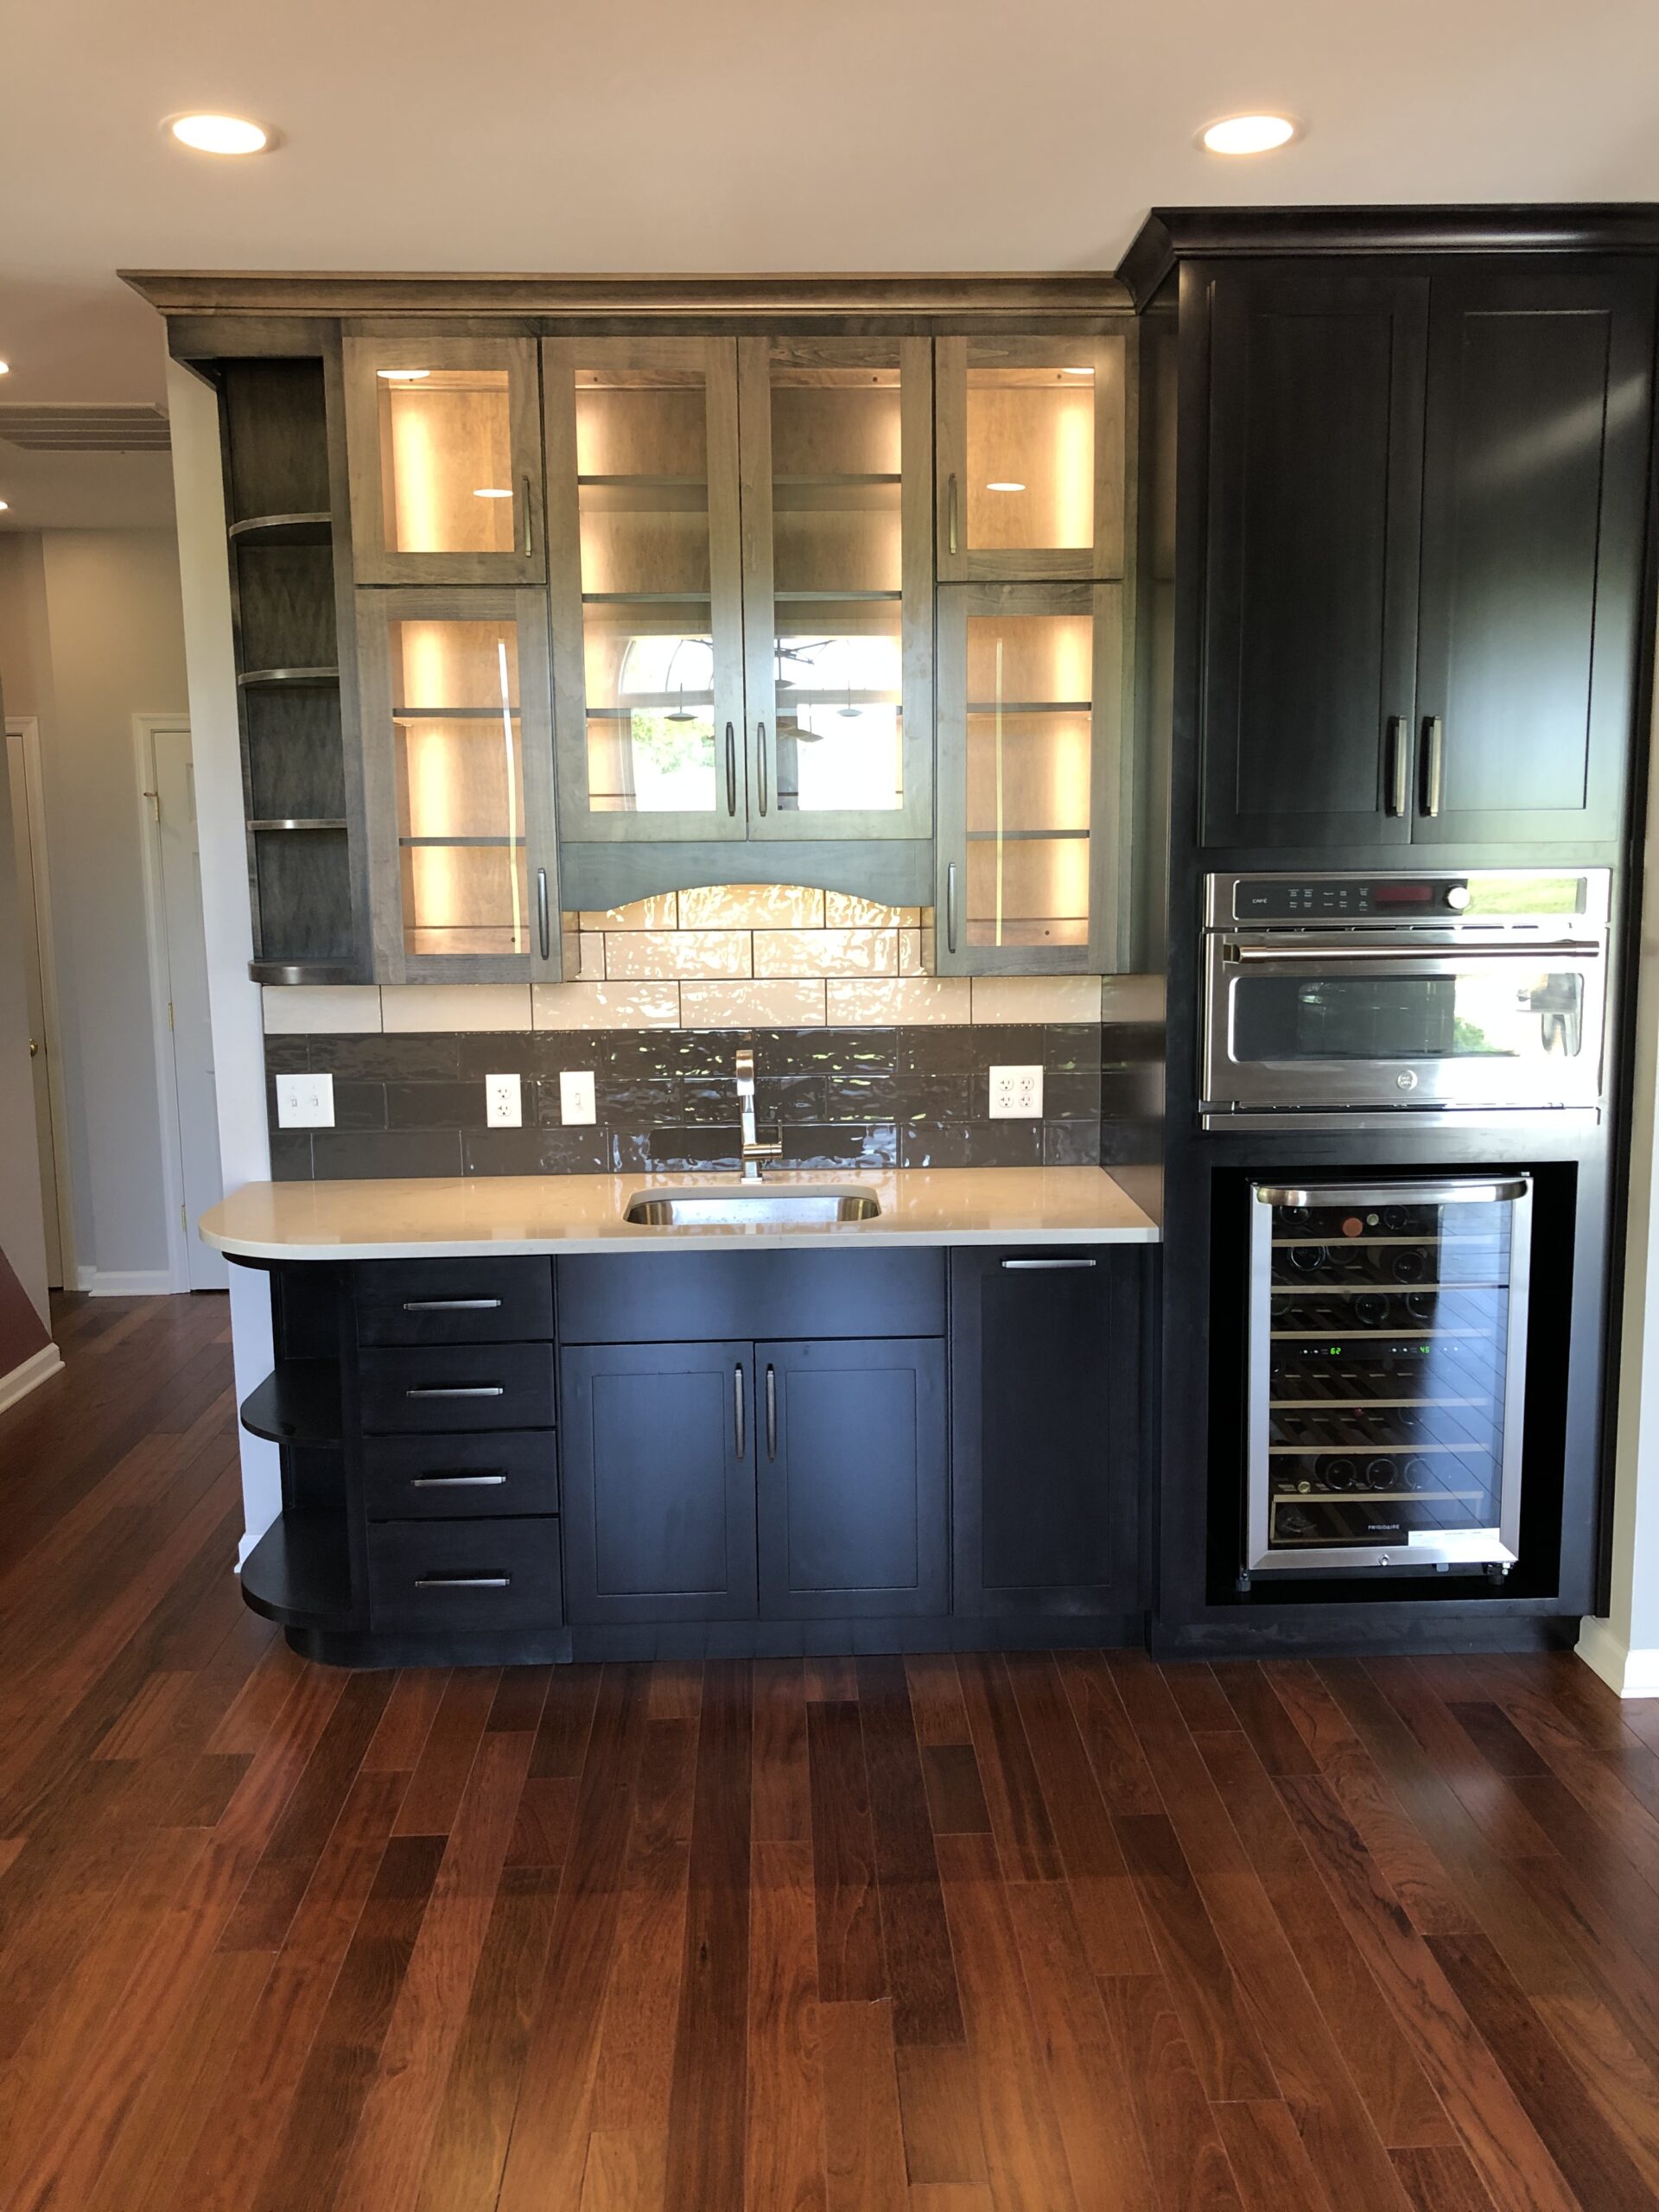 There are very few home remodeling projects that will give you more joy - and more headaches - than remodeling your kitchen.